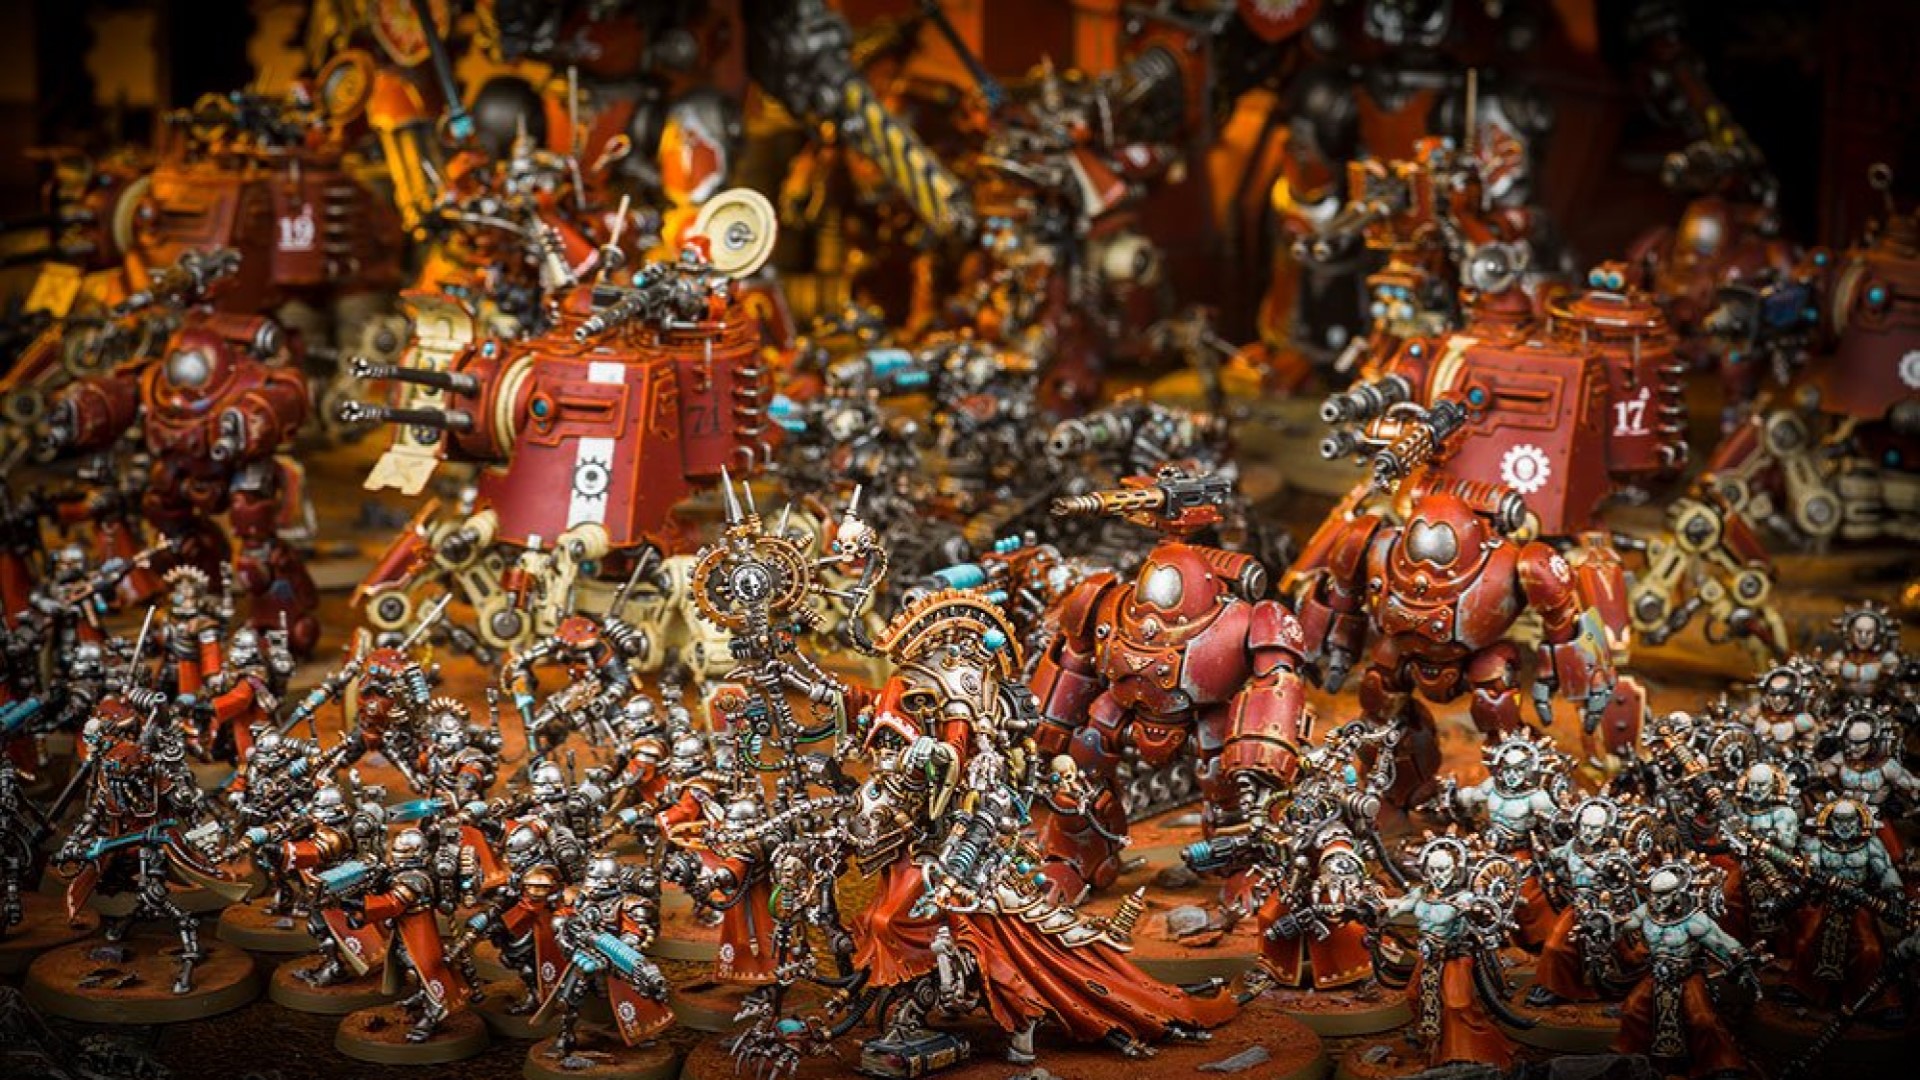 Adeptus Mechanicus in Warhammer 40K 10th Edition - Full Admech Index Rules  and Datasheets Review 